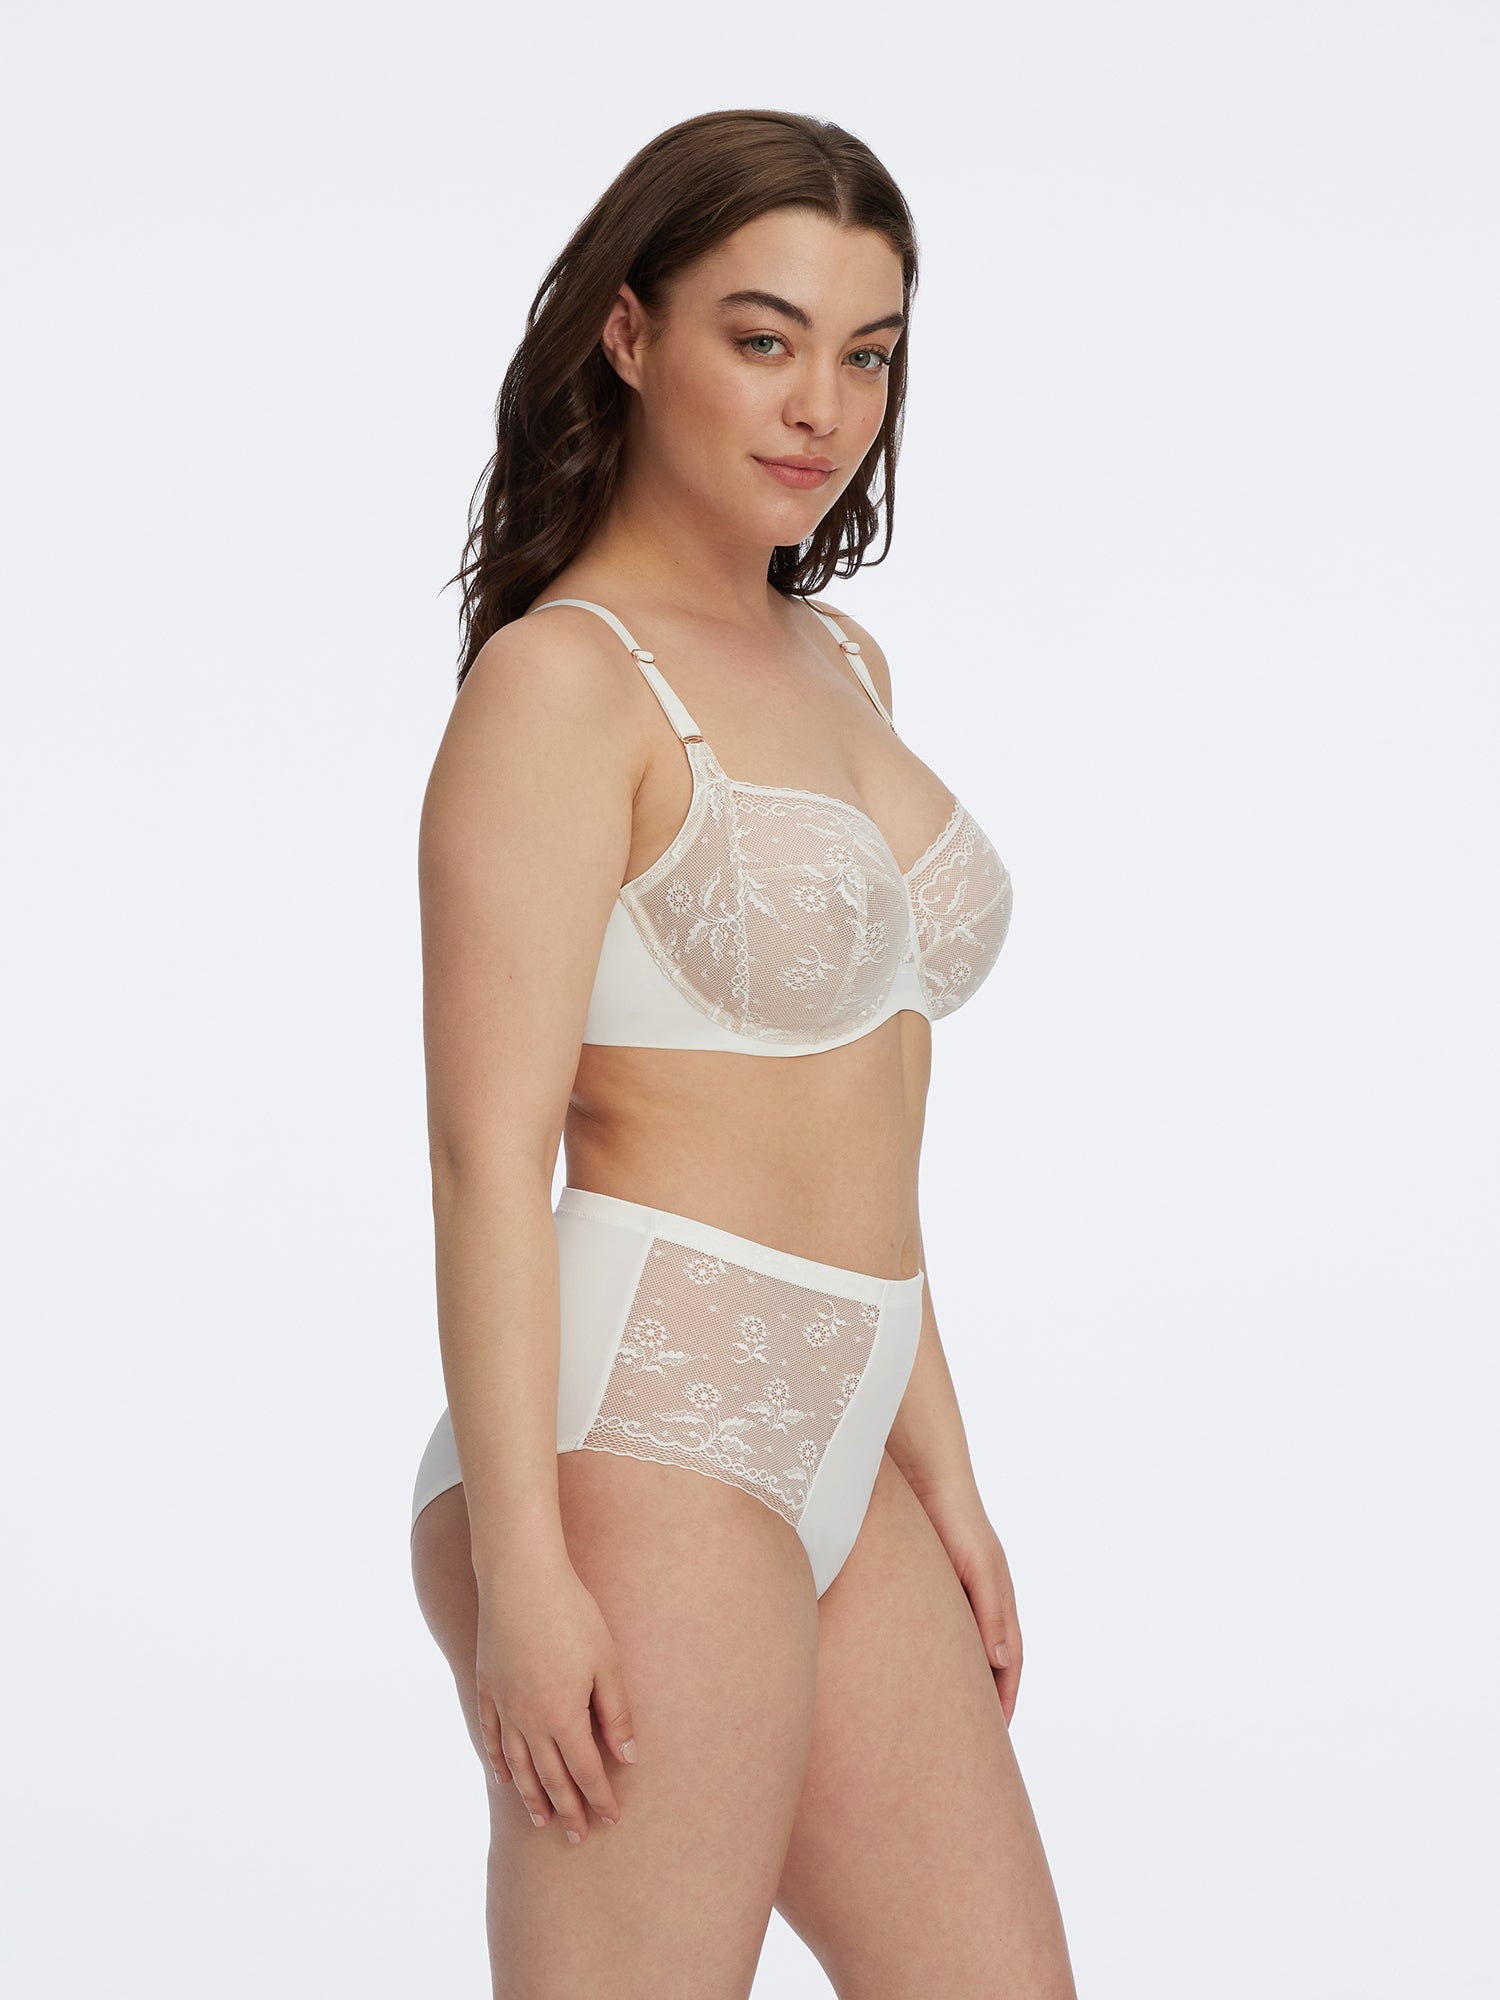 Elevate Lifestyle - Check out I. C. London Lingerie, The Bra